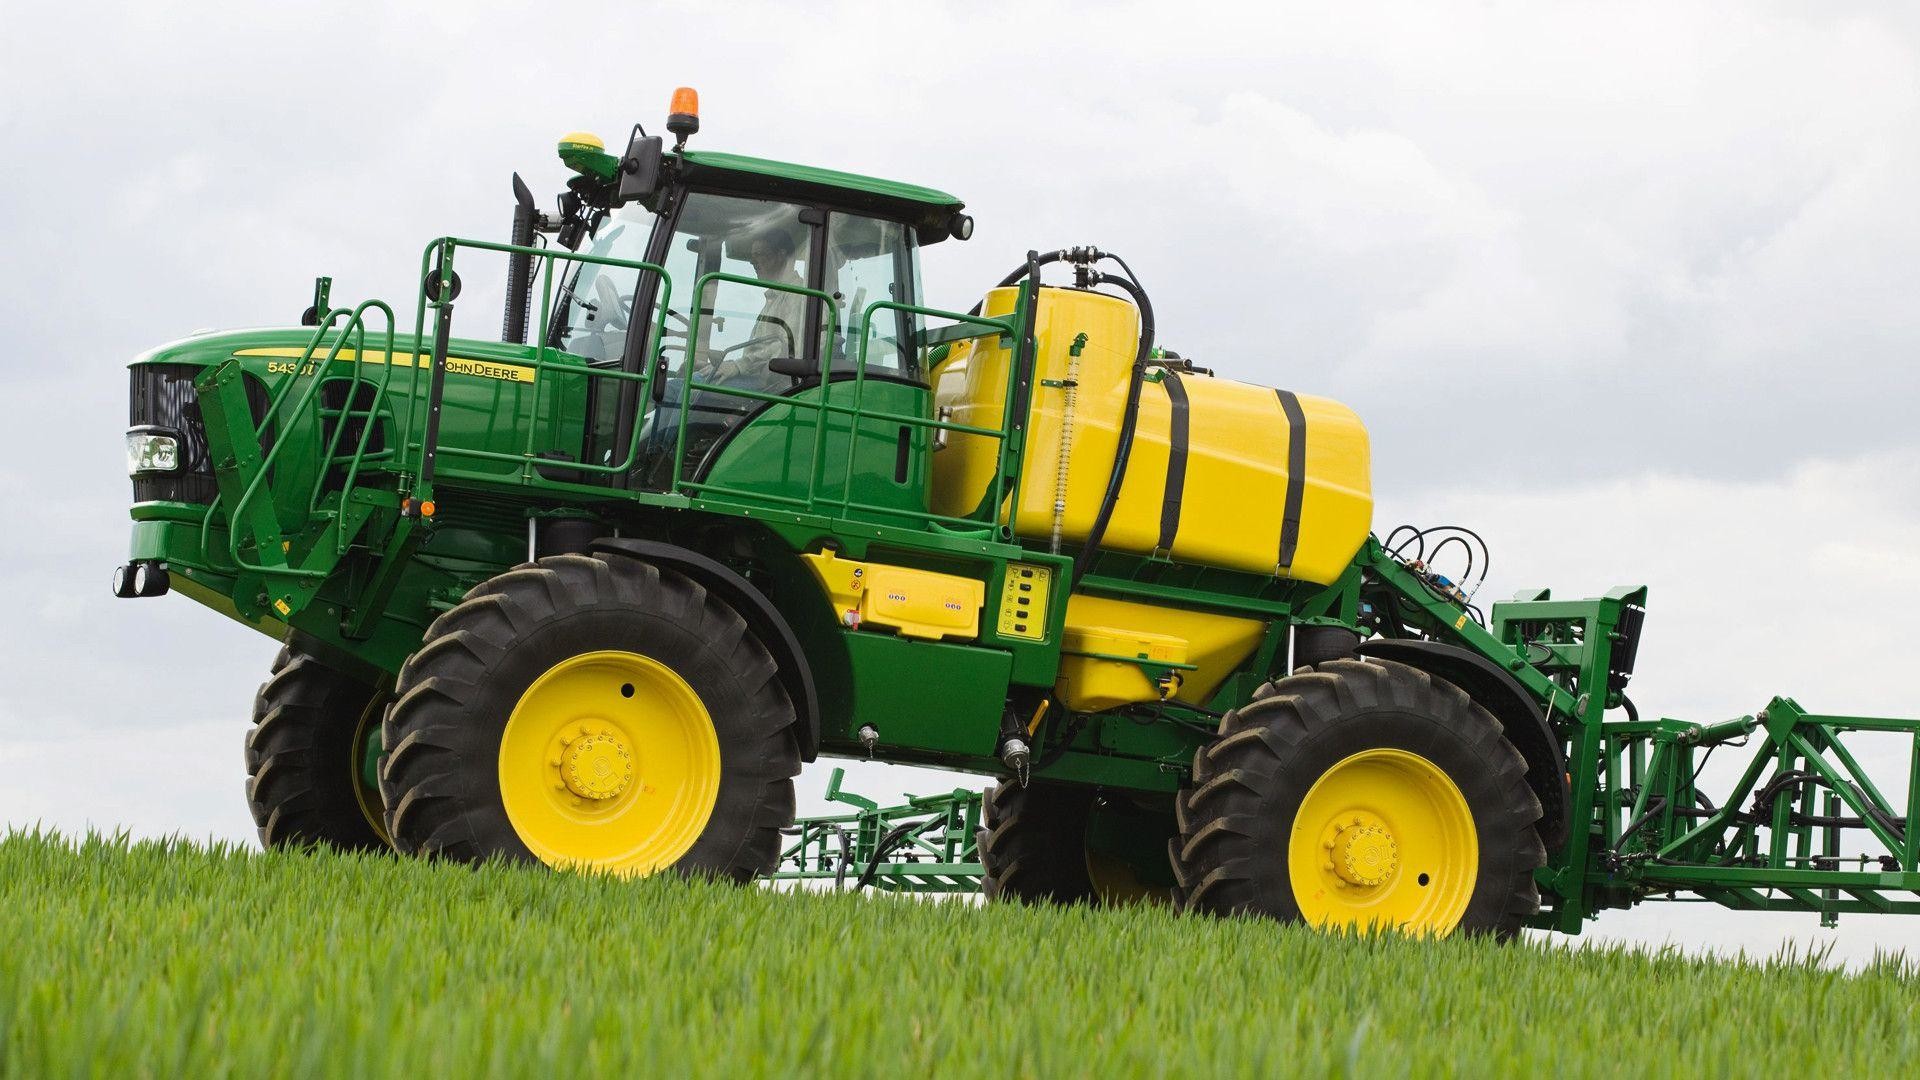 john deere wallpaper hd,land vehicle,vehicle,tractor,field,agricultural machinery